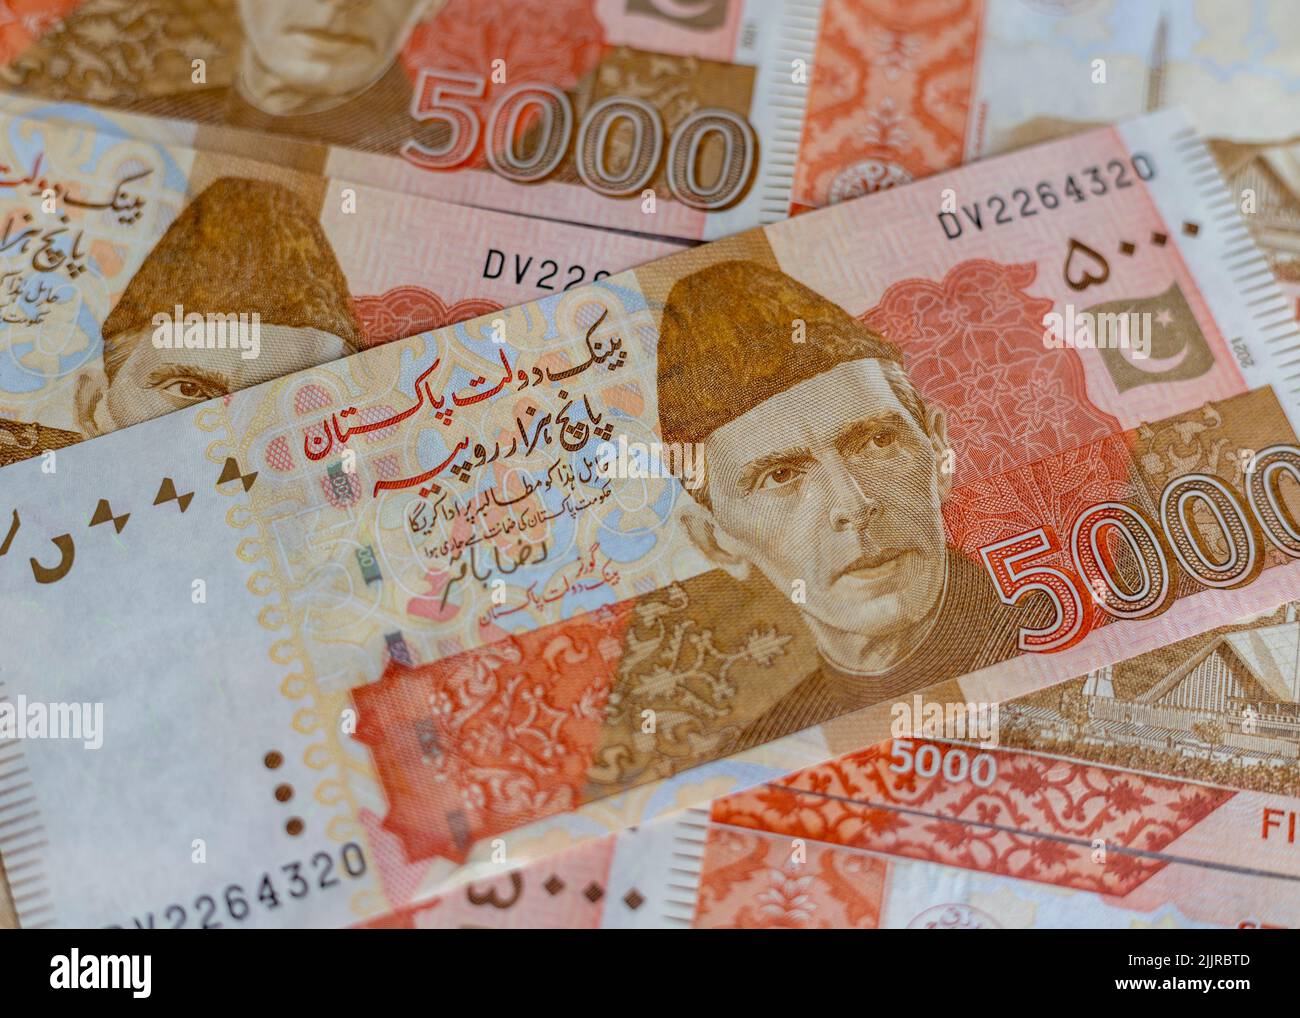 Pakistani currency bank note of 5000 rupees close up view Stock Photo